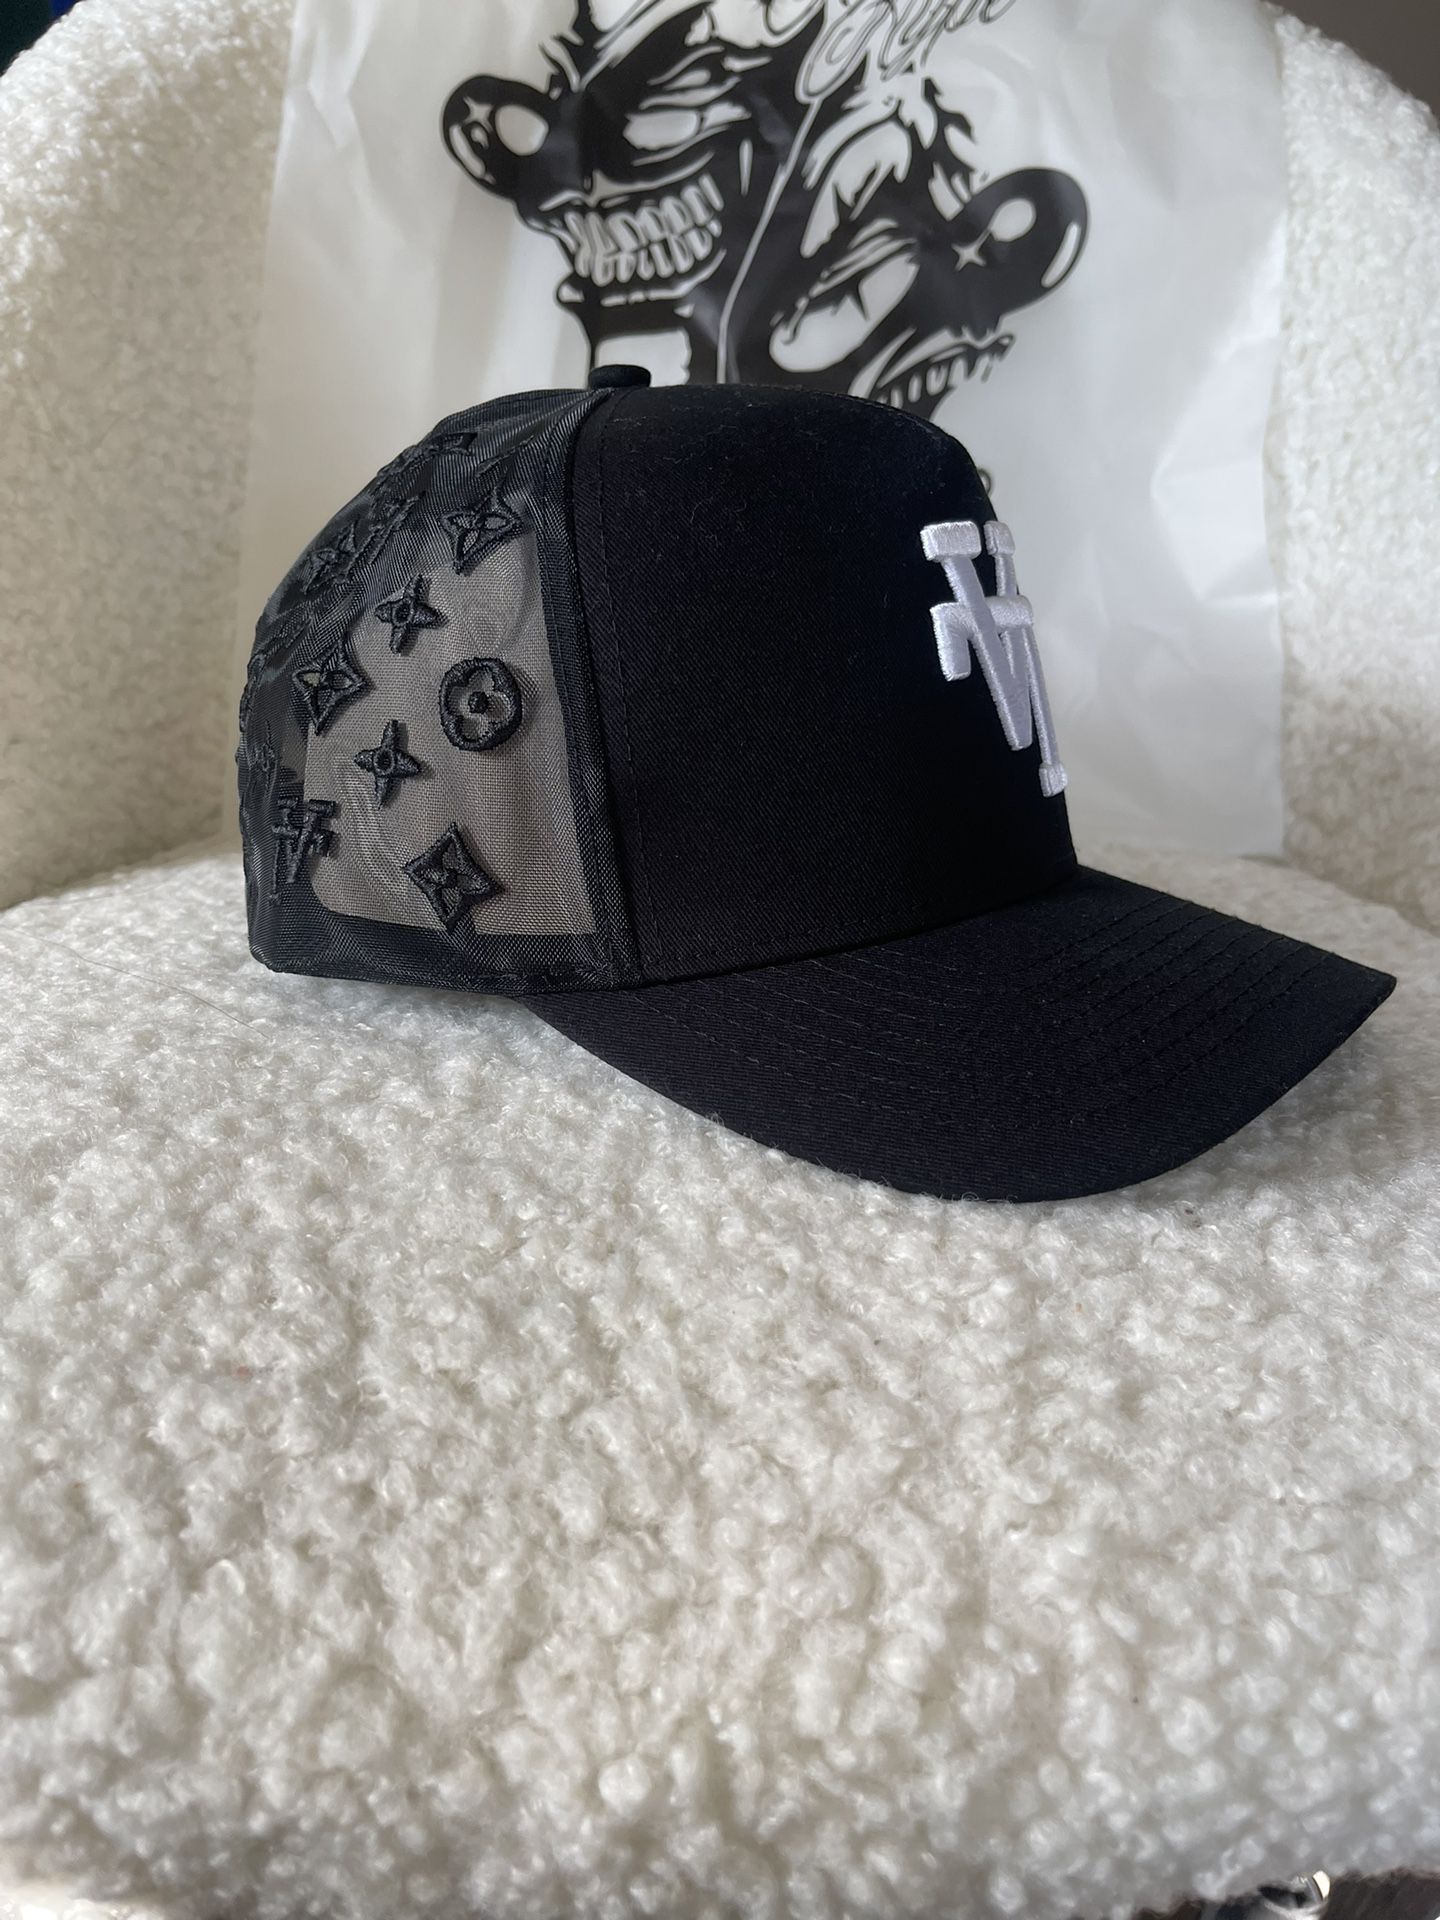 LOuis Vuitton /Supreme calibration Hat for sale in Sylmar, CA - 5miles: Buy  and Sell